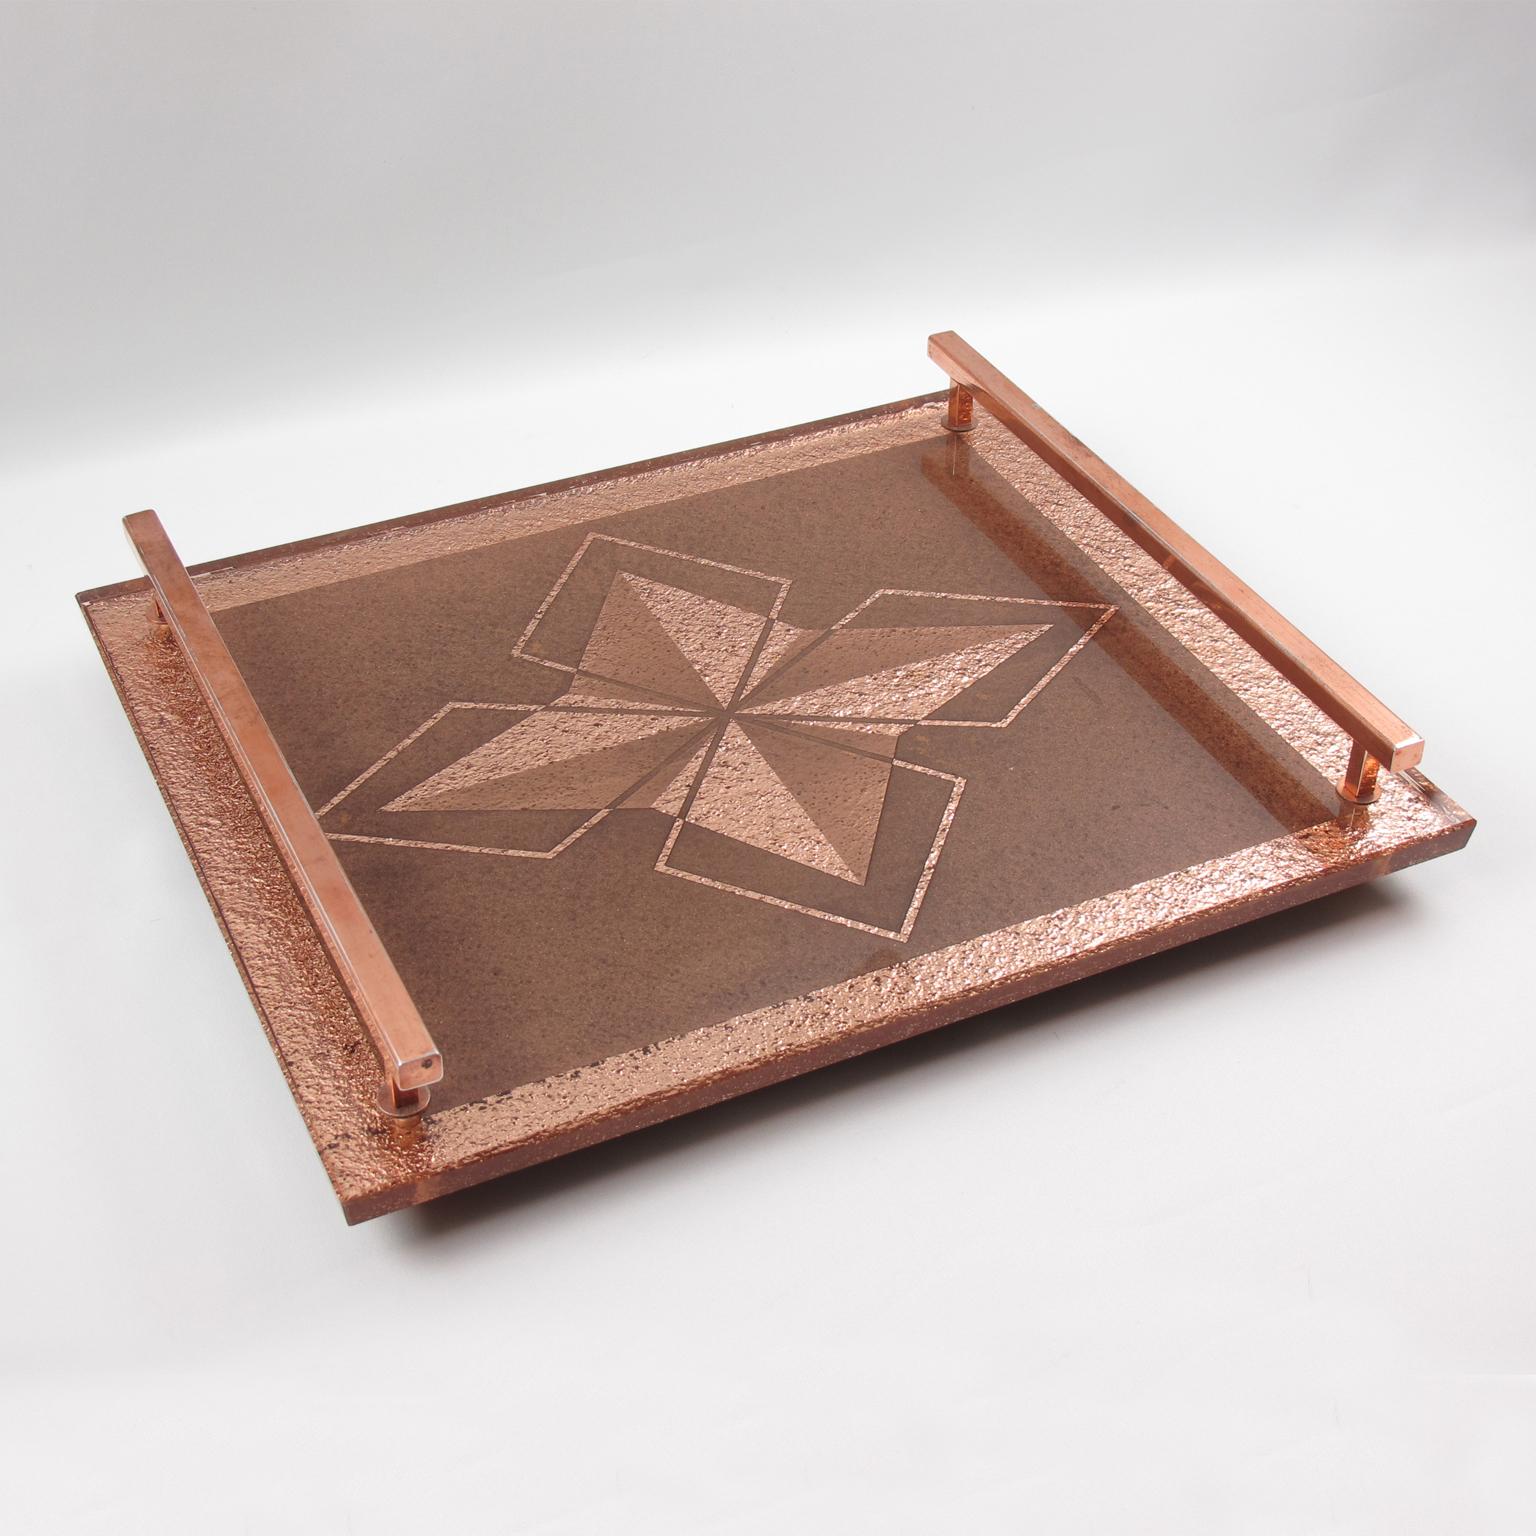 This lovely French Art Deco copper metal and peach-color mirror tray features a thick mirrored glass slab in copper or pink-peach color with reverse geometric etching and star design. The tray has large copper handles on both sides. The delicate and